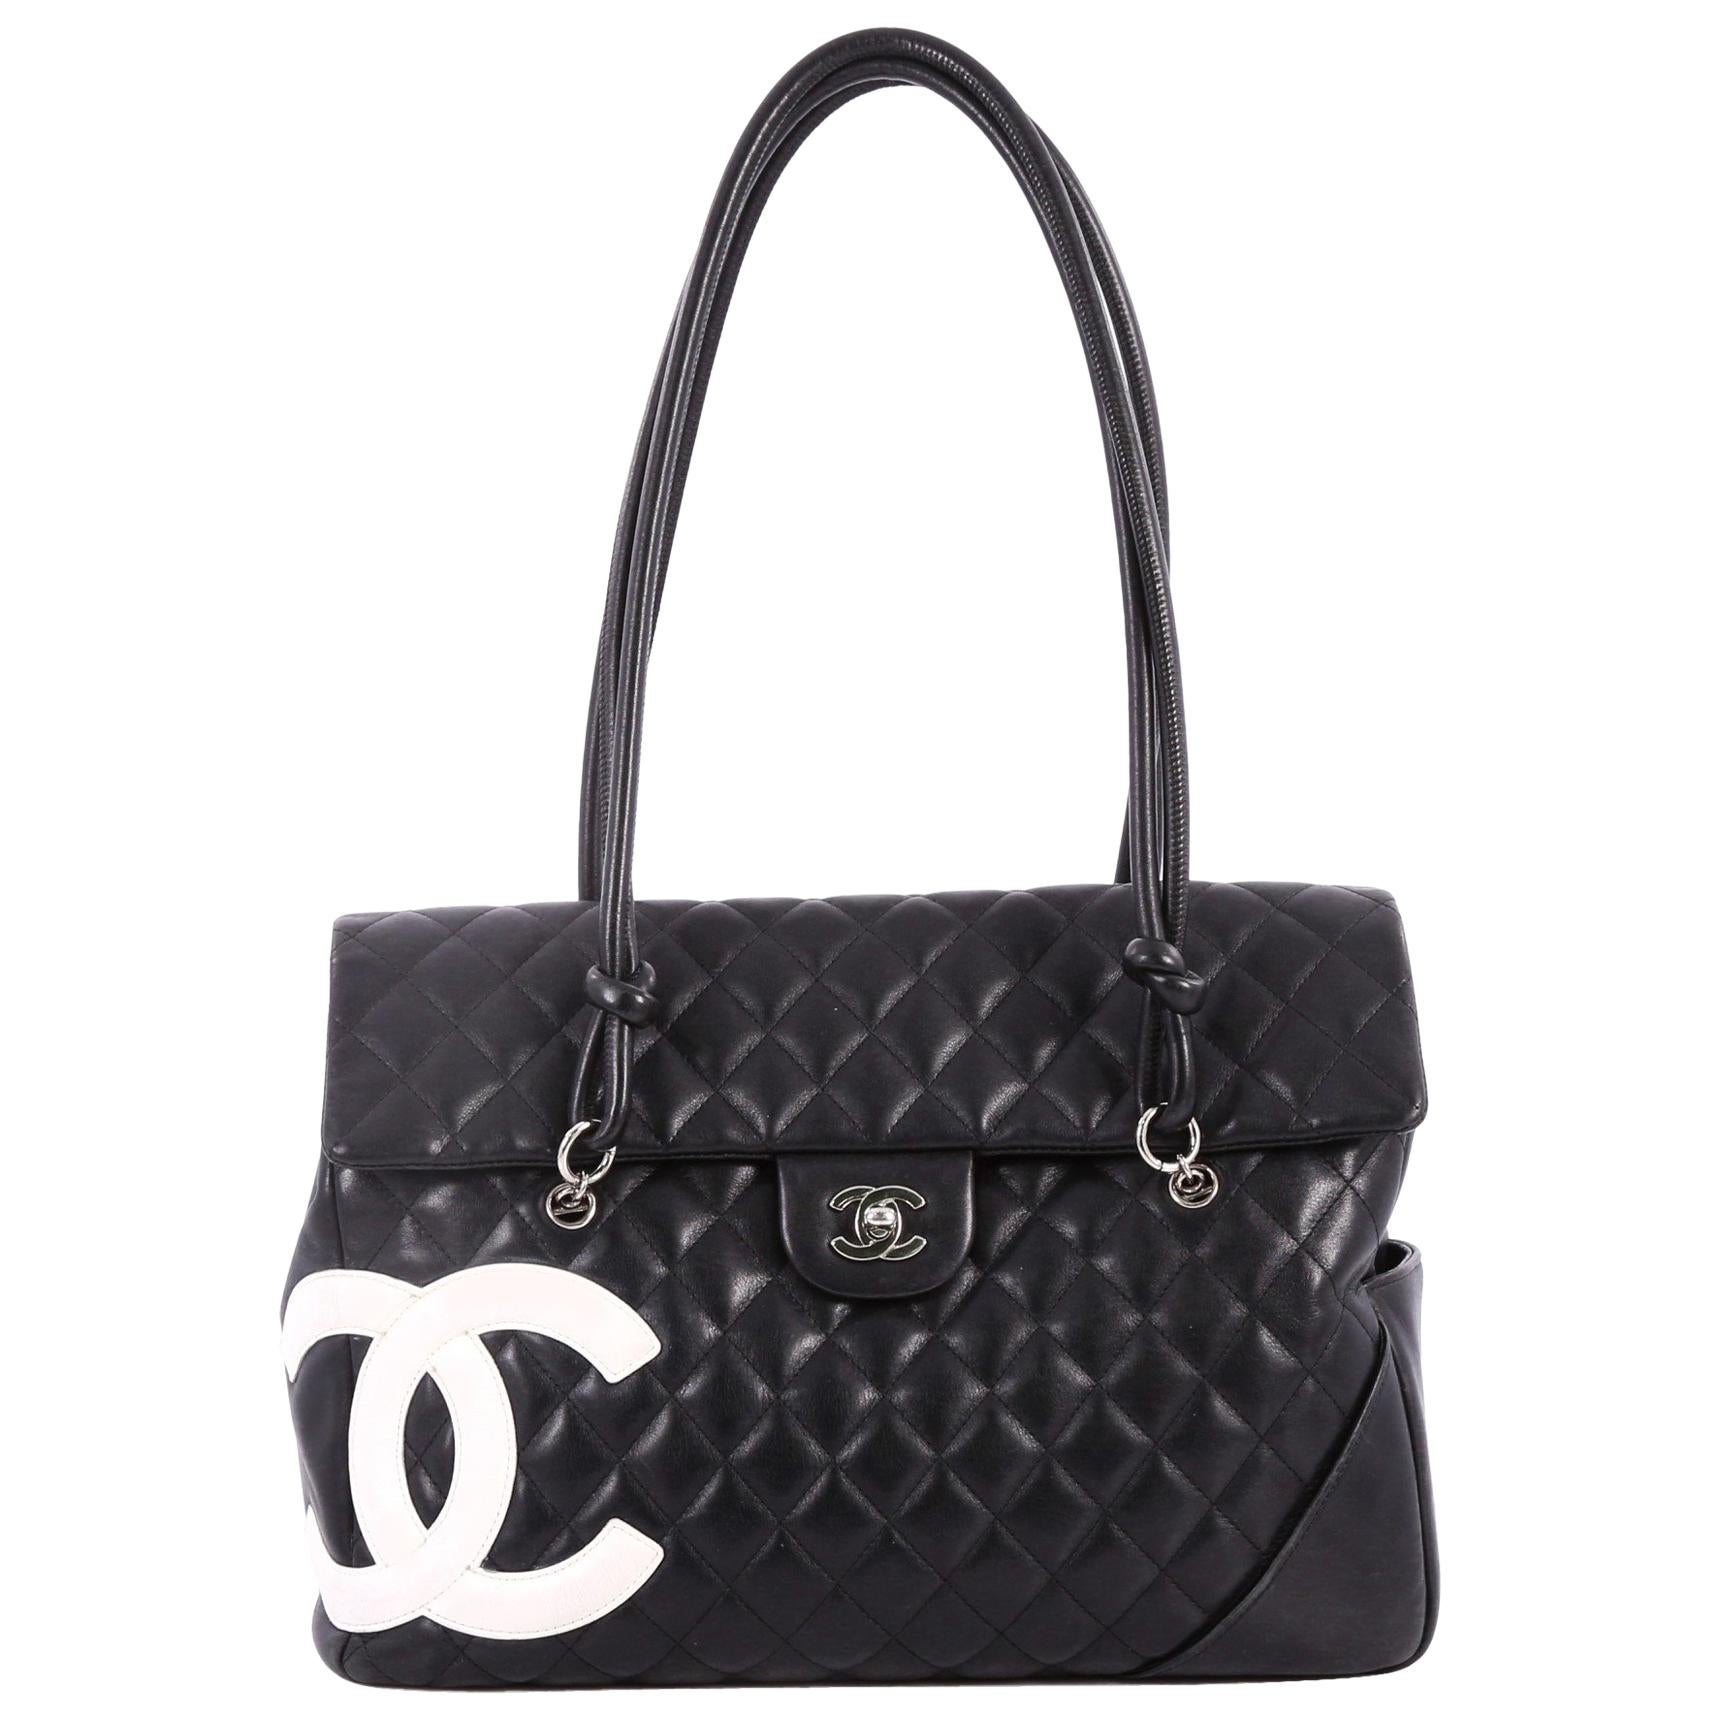 Chanel Red Quilted Lambskin CC Trendy Bowling Bag